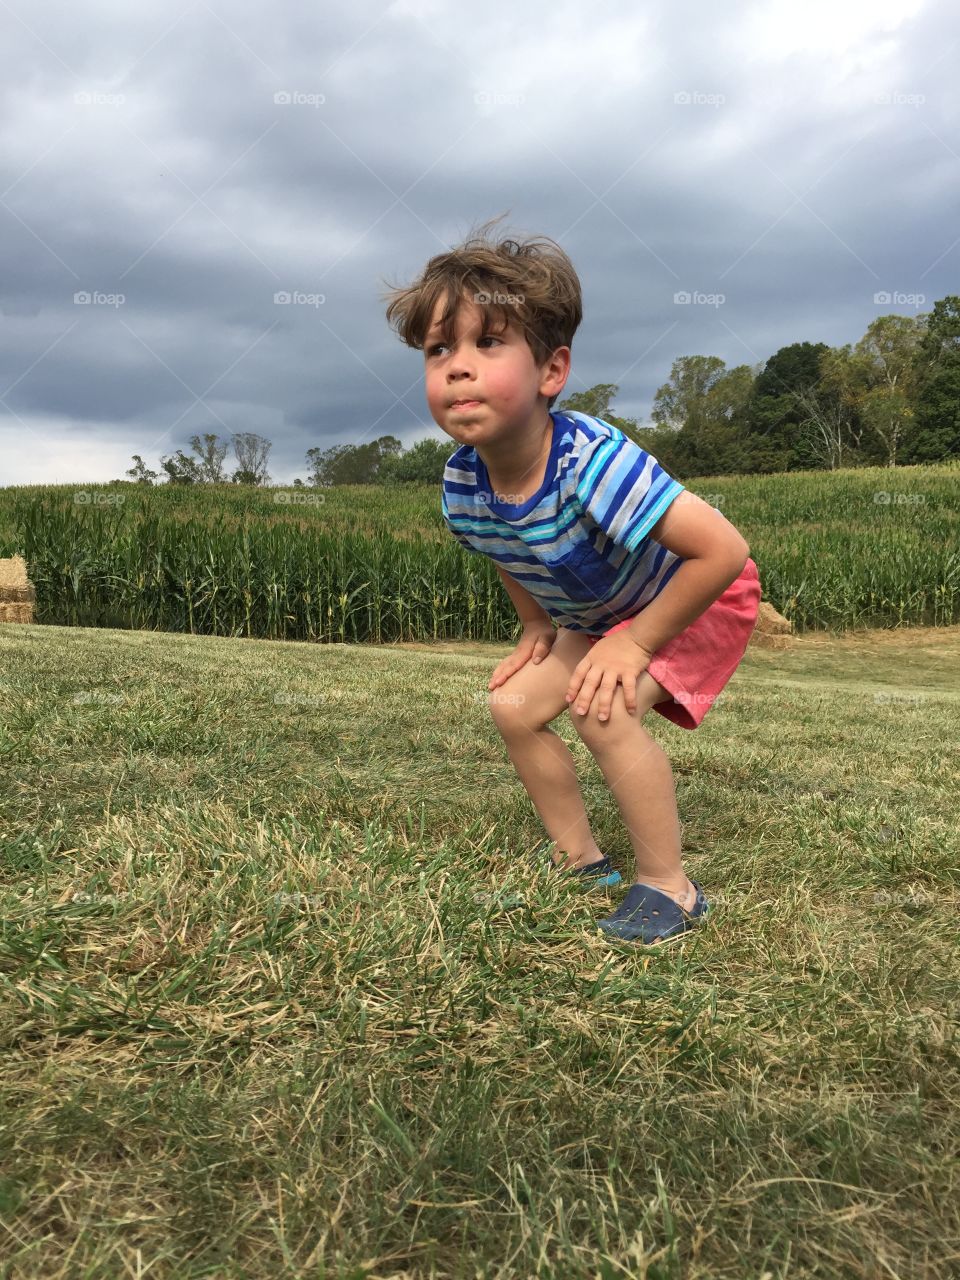 Boy Crouched in a Corn Field